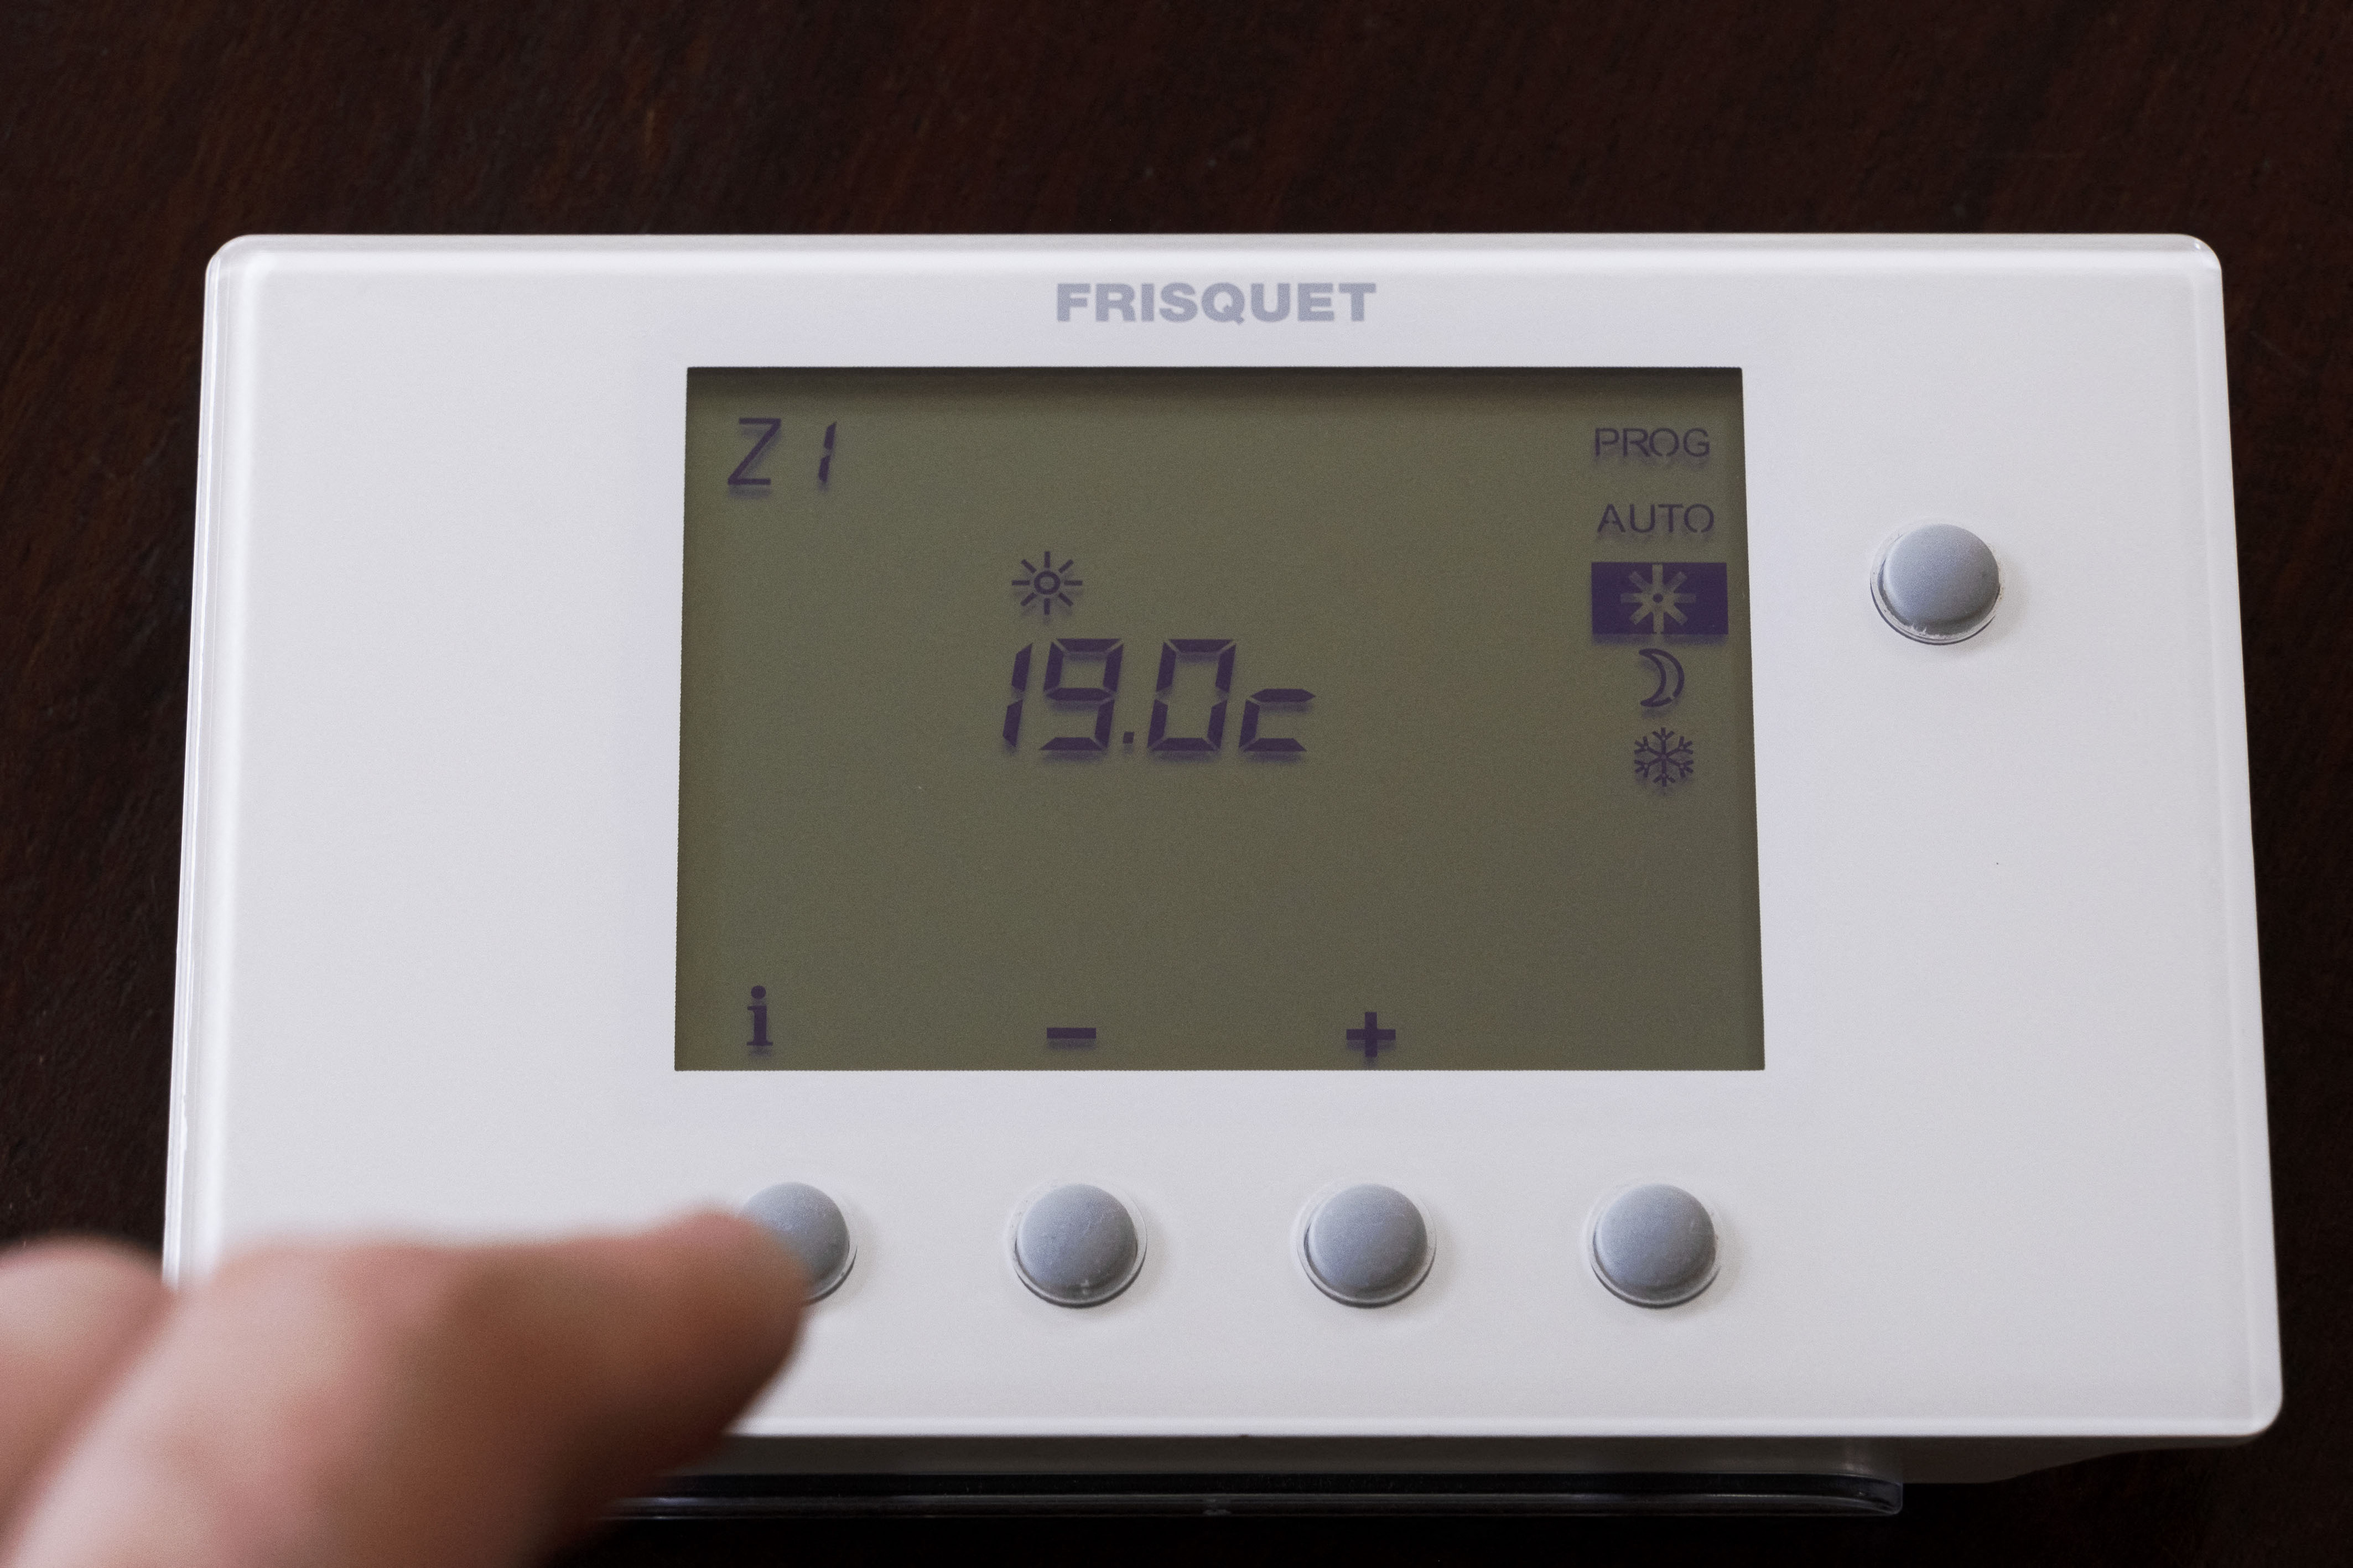 Nova Scotians frustrated with province’s decision to lower heating rebate amount